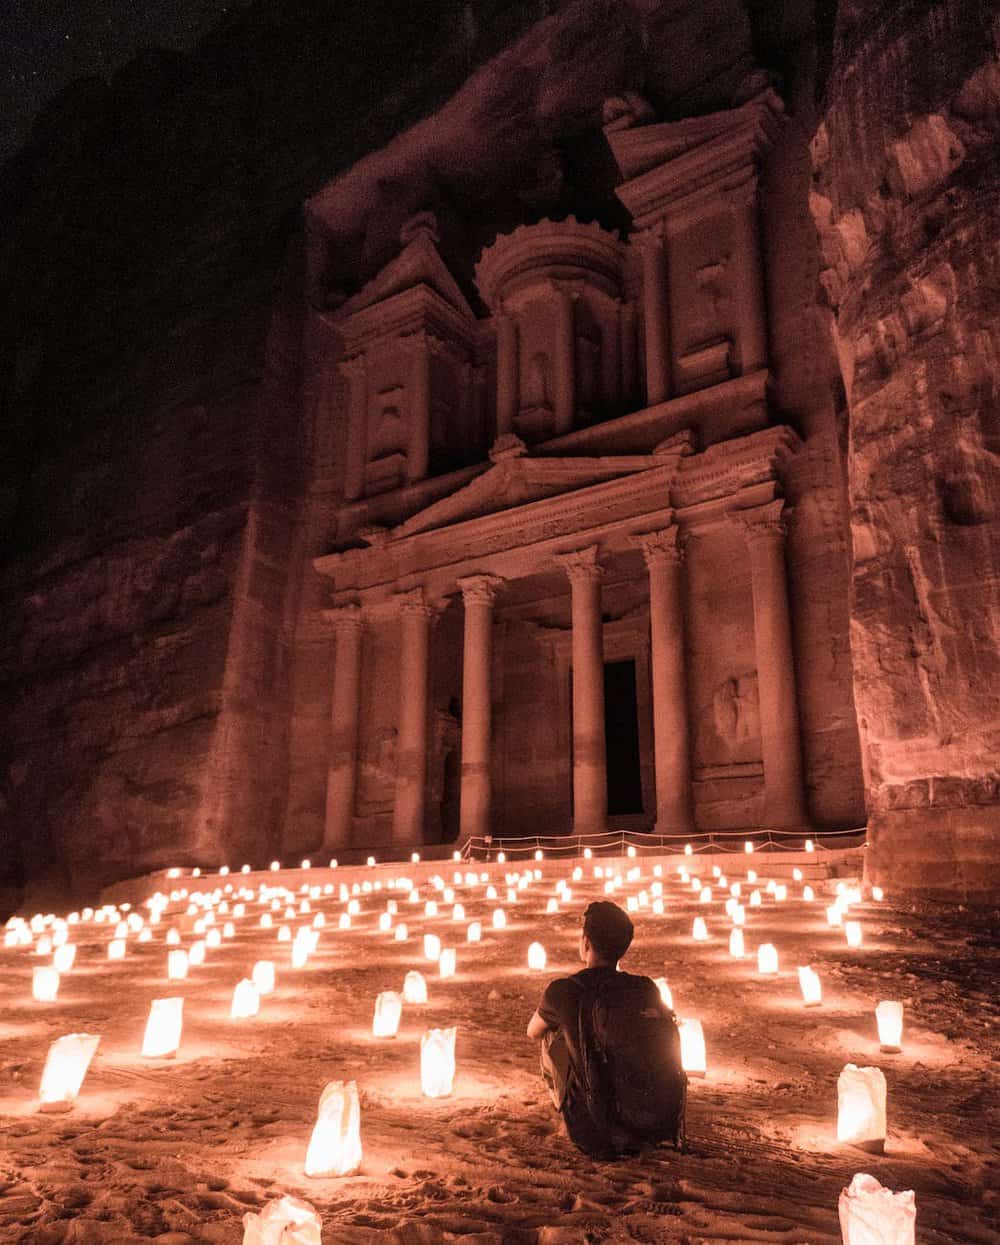 a man sitting outside of the famous petra building carved into red stone sliffs. a famous one of the biblical sites